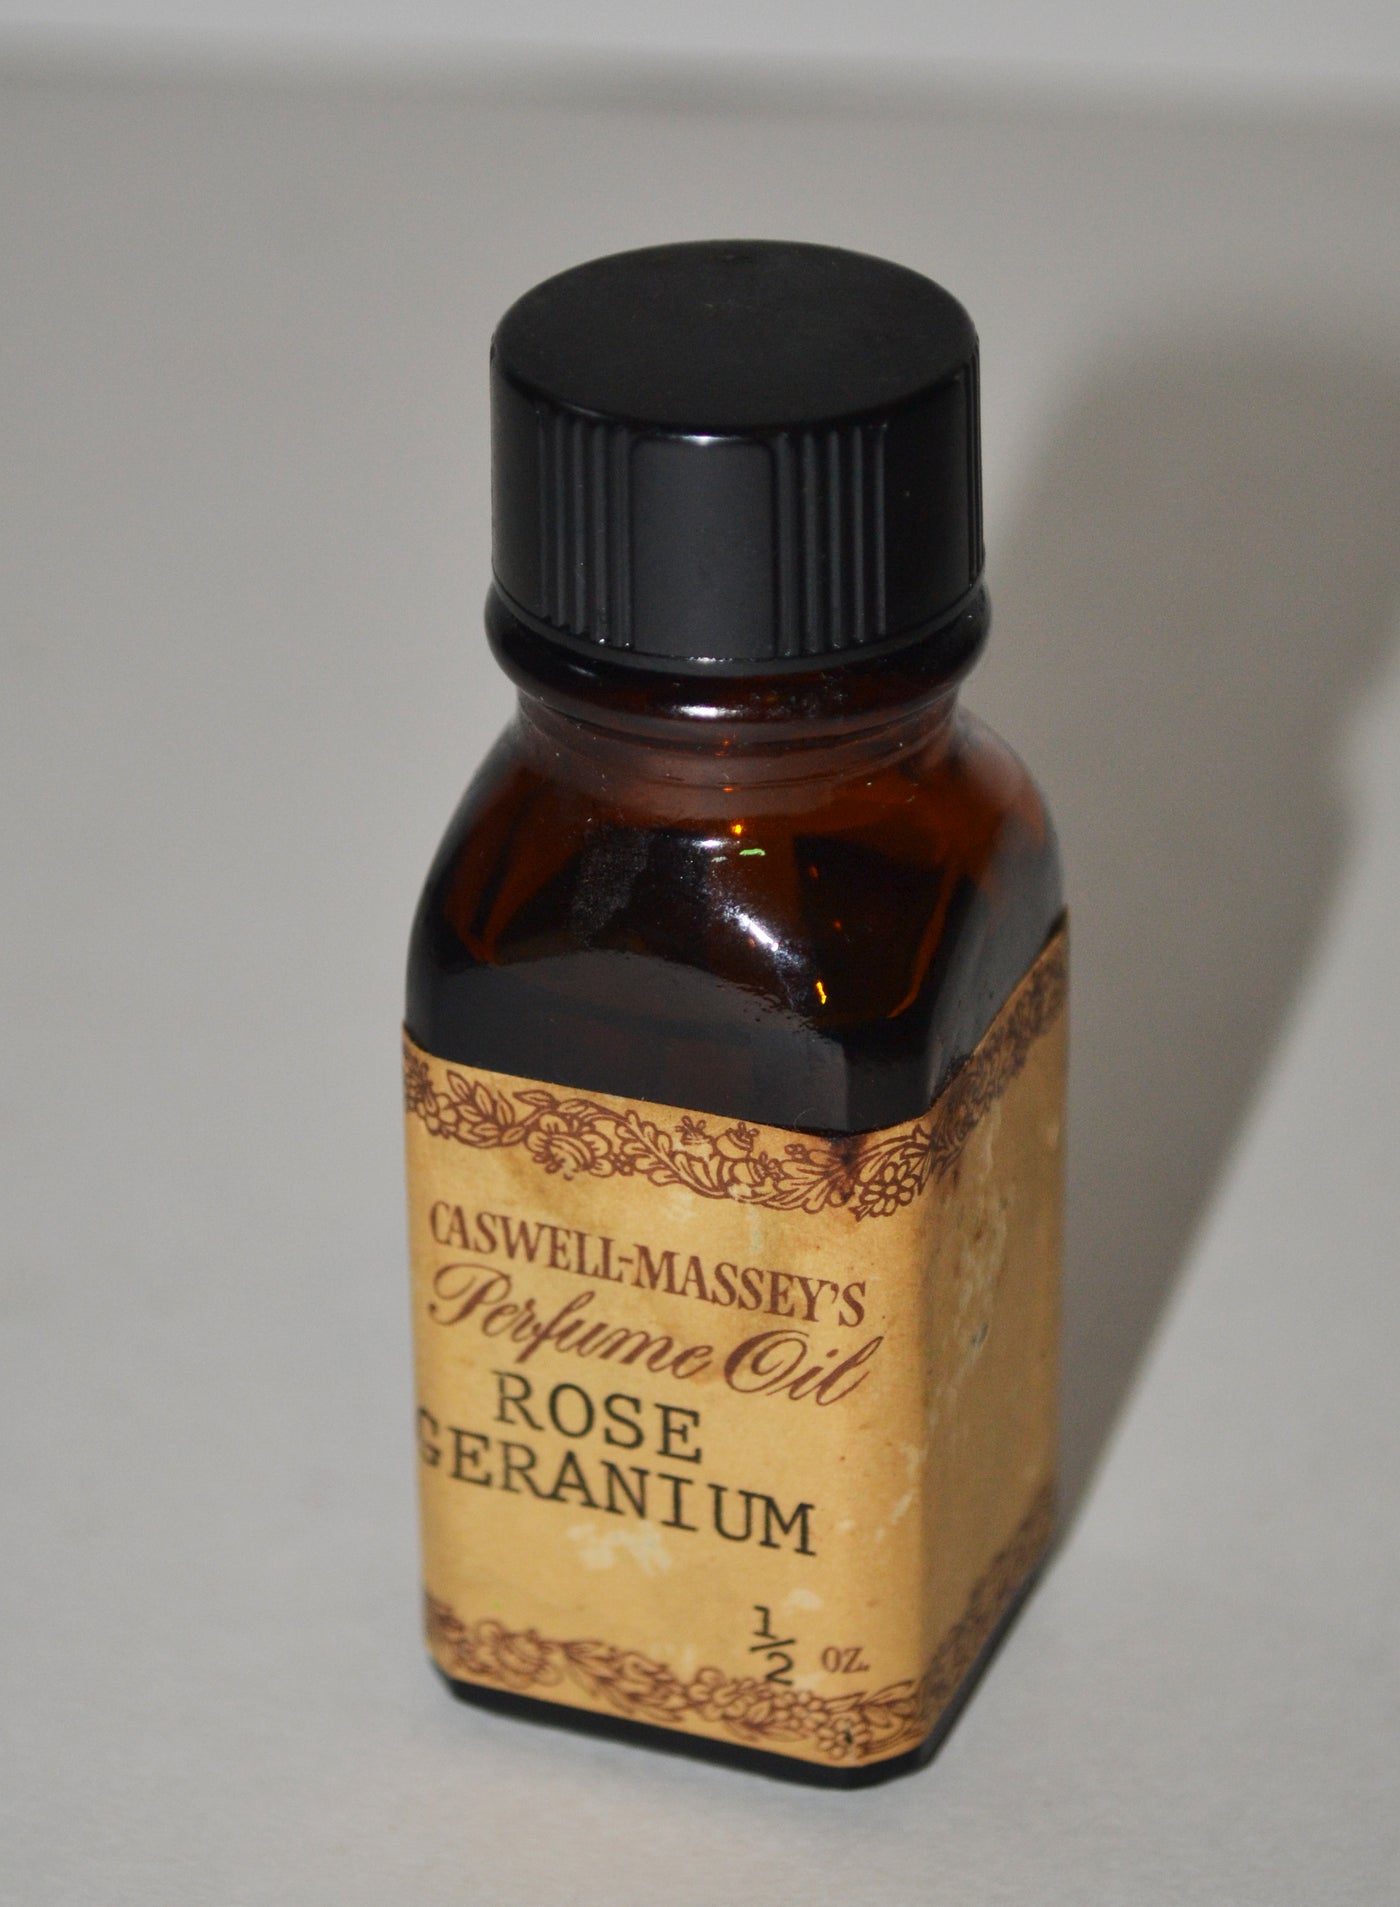 Rose Geranium Perfume Oil By Caswell-Massey